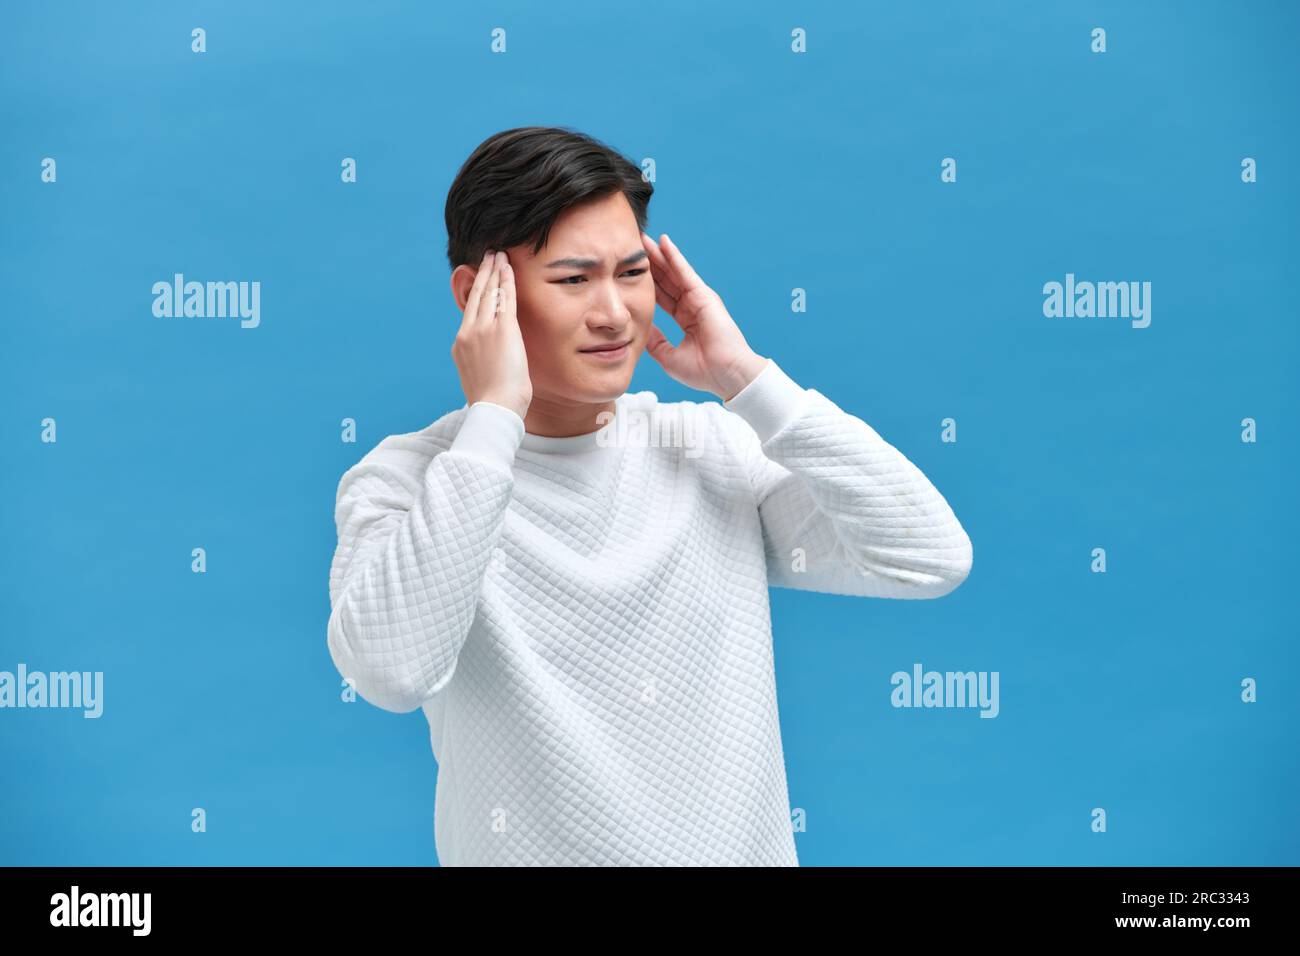 young Asian man holds head while dizzy on isolated background Stock Photo